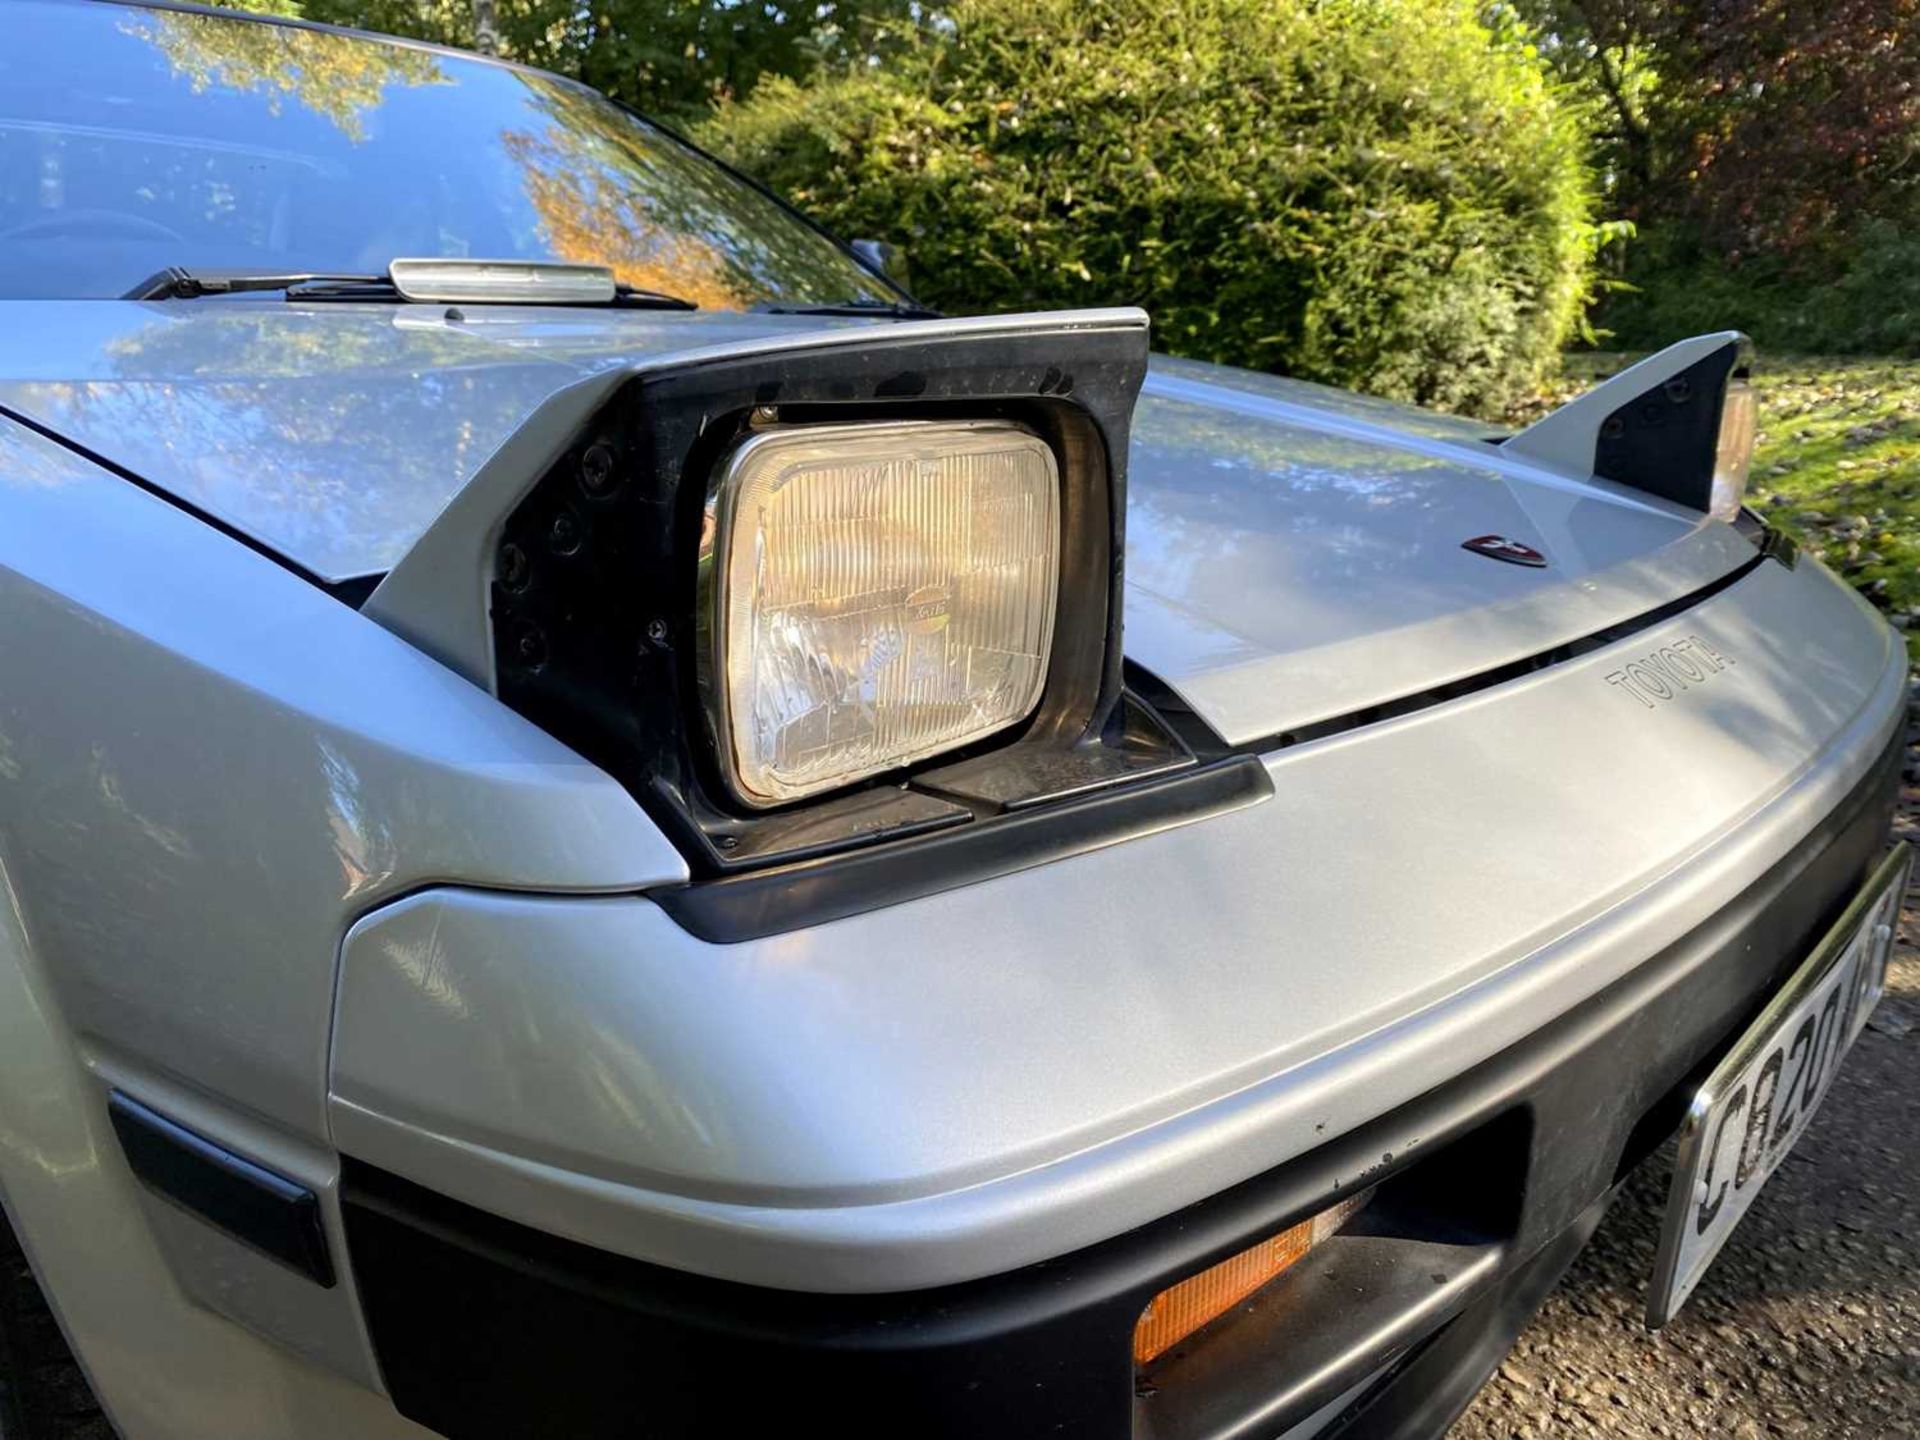 1985 Toyota MR2 Coupe Restored example of an appreciating modern classic - Image 61 of 100